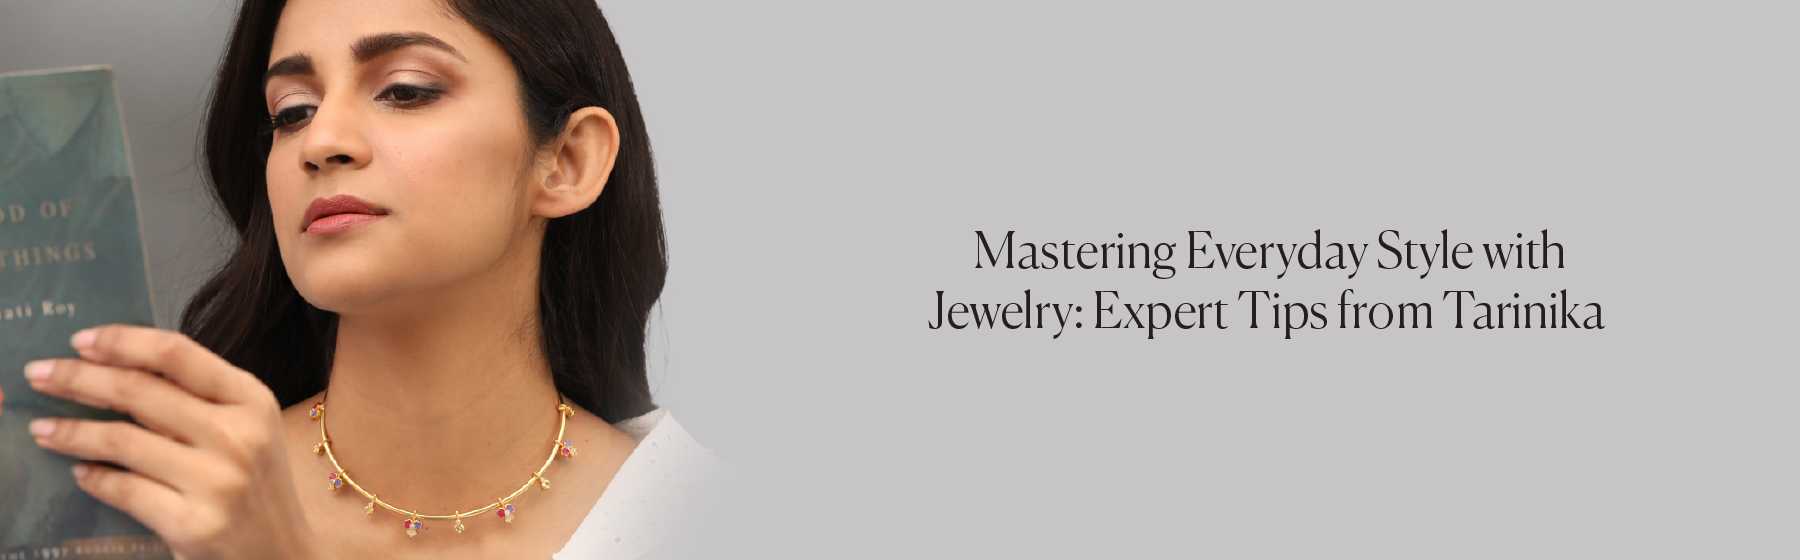 Mastering Everyday Style with Jewelry: Expert Tips from Tarinika